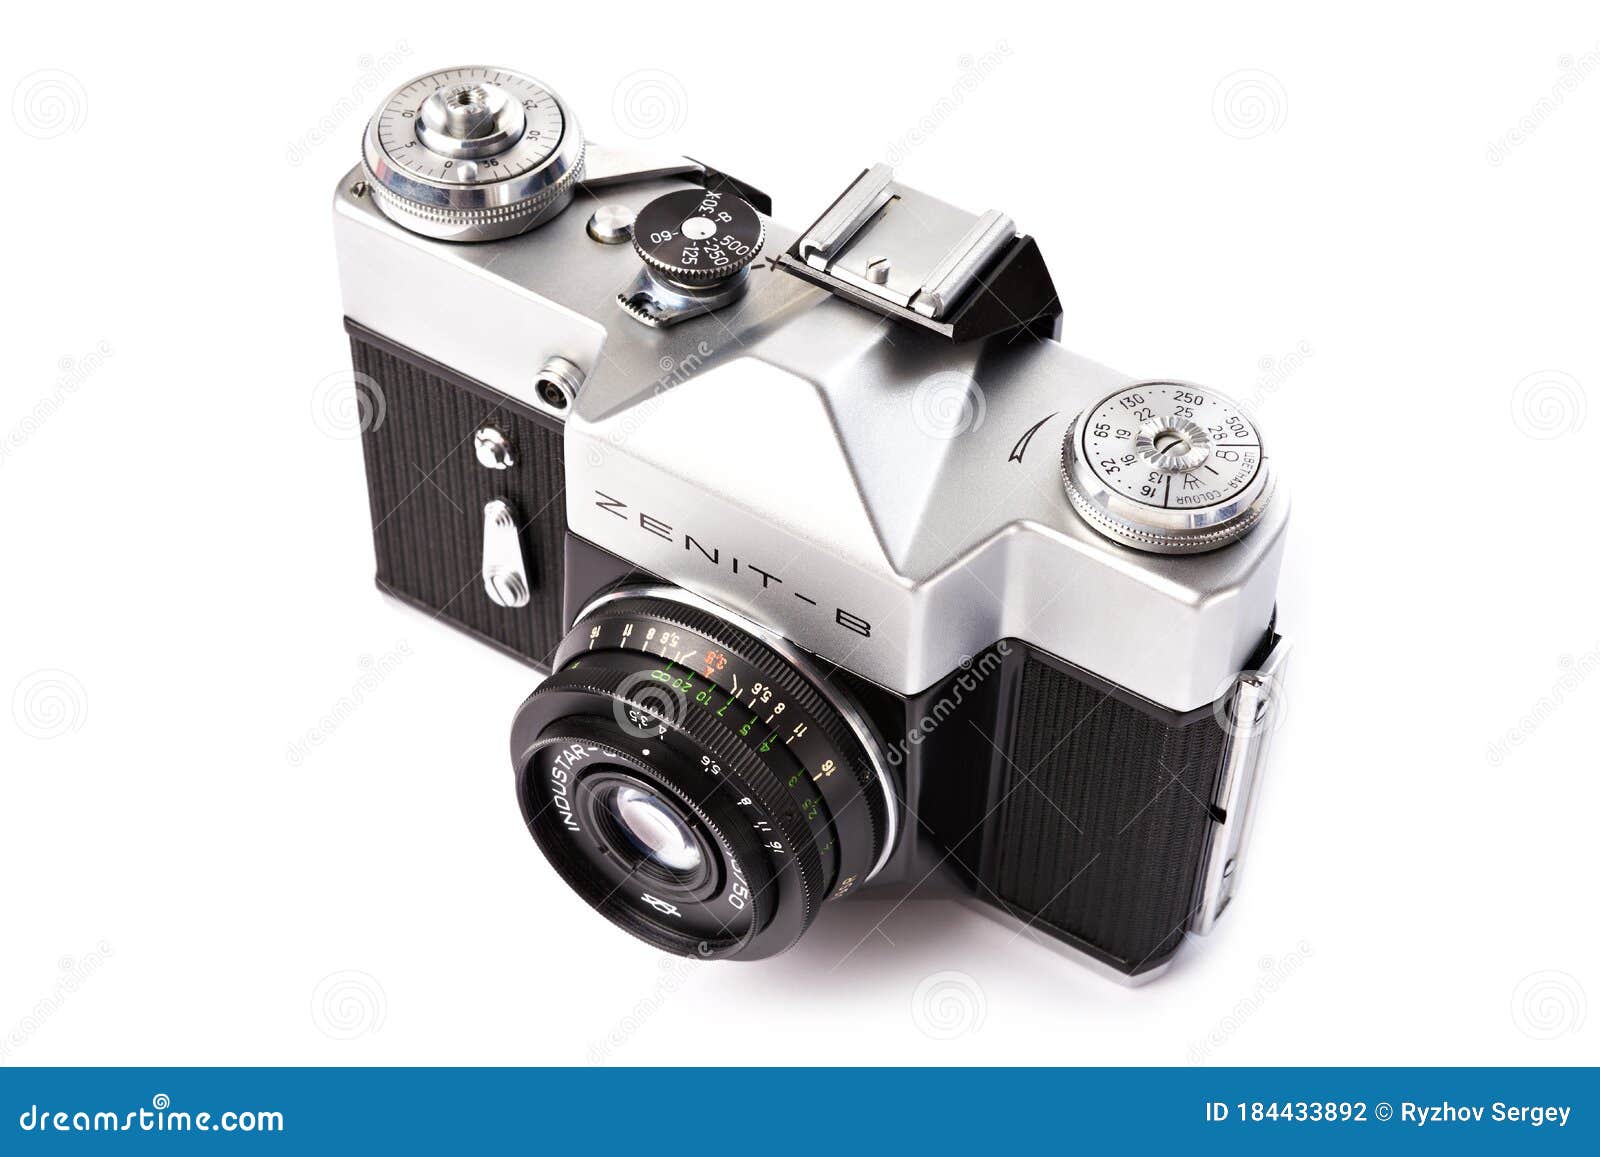 Moscow , RUSSIA - May 26, 2020: Zenit-B - Russian Soviet 35 Mm SLR